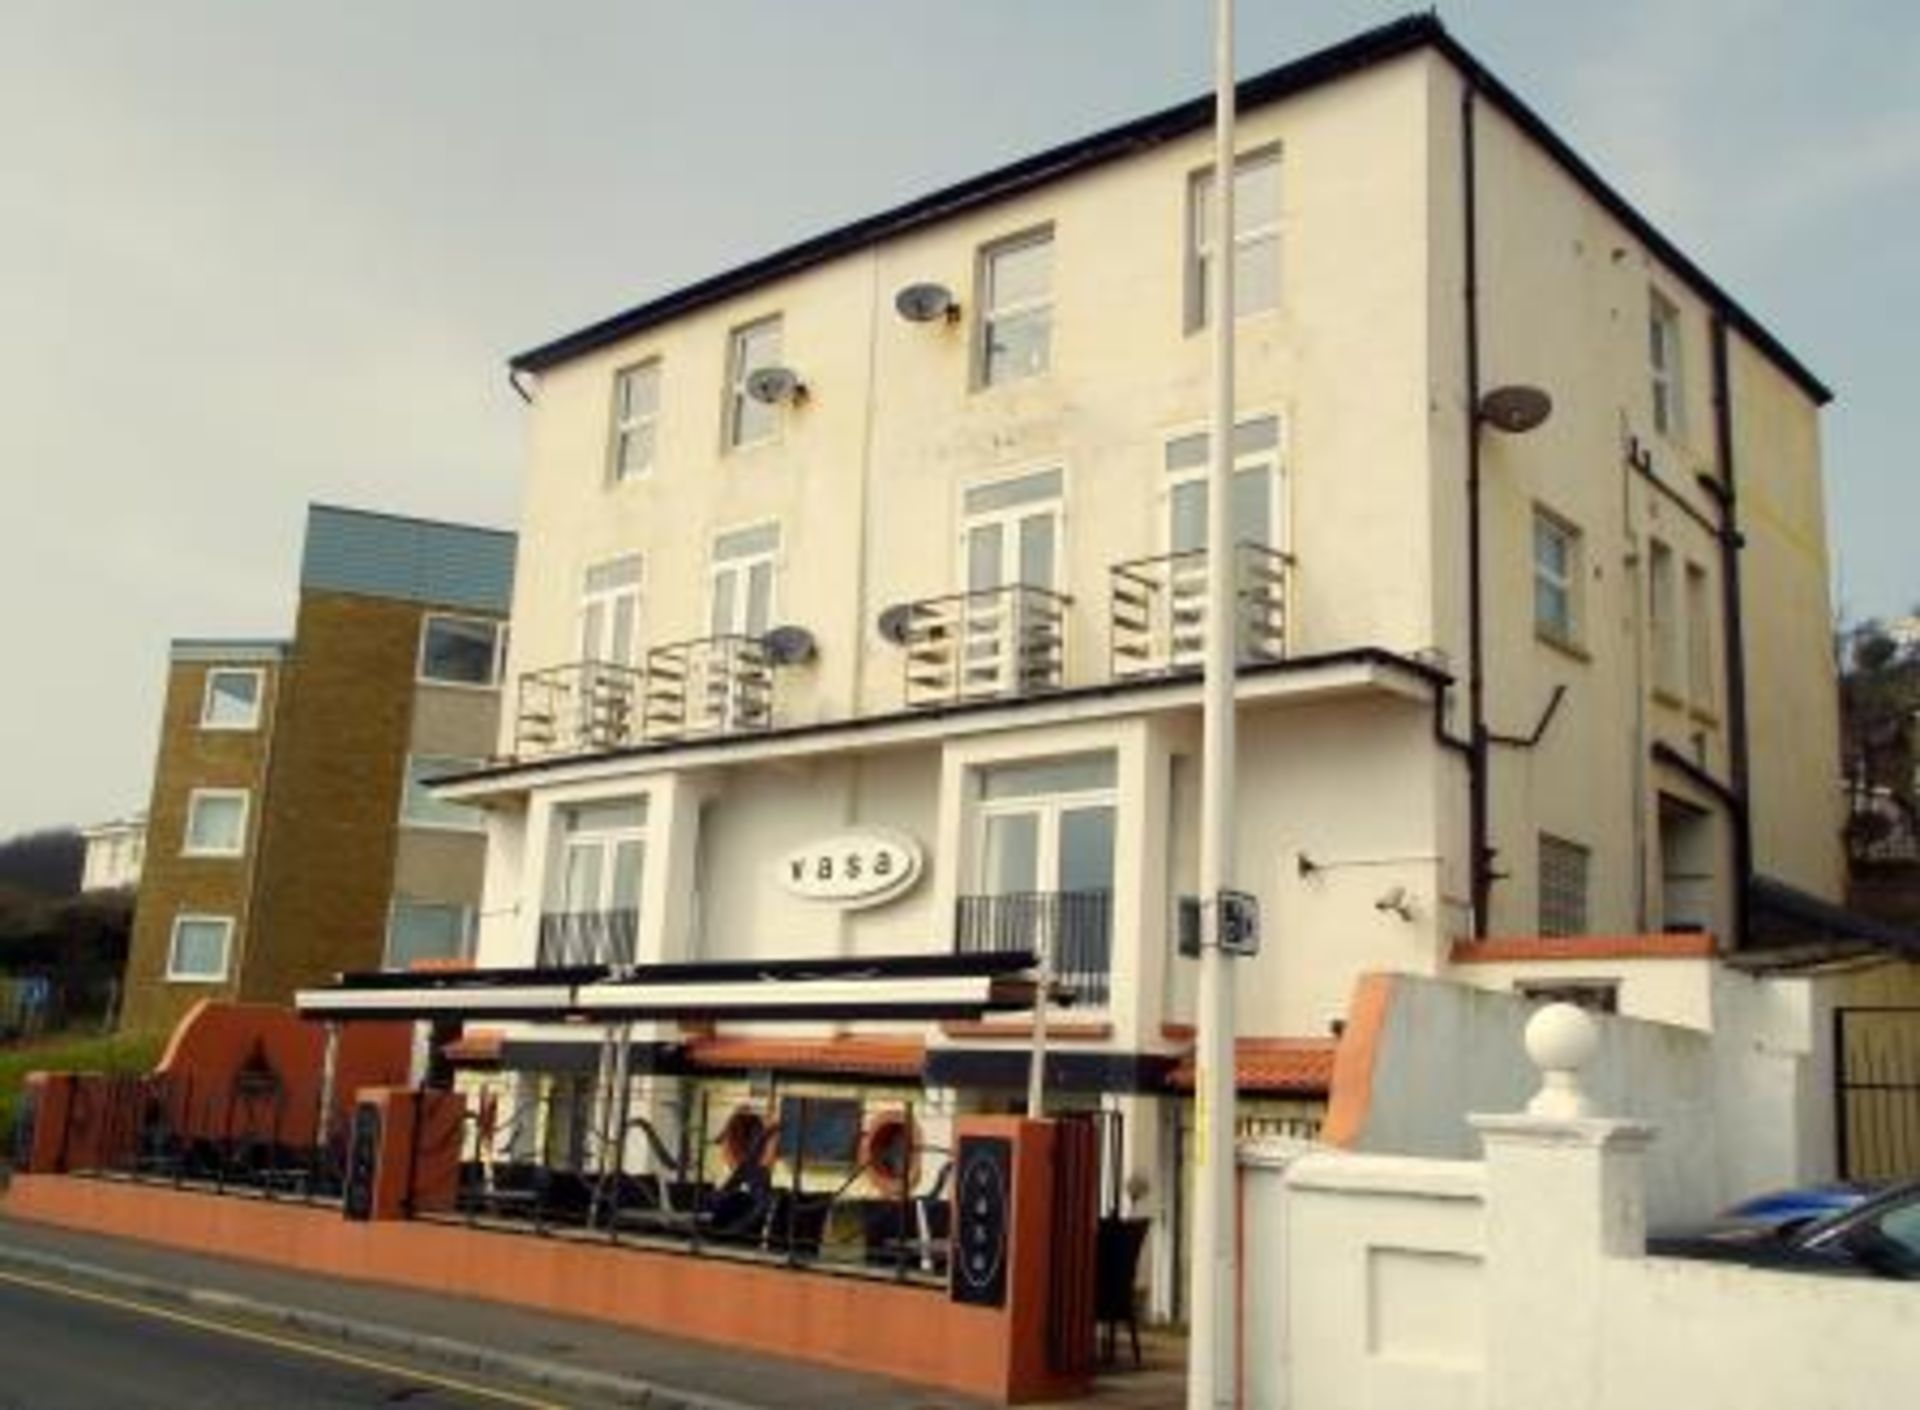 FOLKESTONE AREA - SEAFRONT RESTAURANT/BAR WITH FUNCTION ROOM AND TERRACE OFFERING POTENTIAL FOR C...